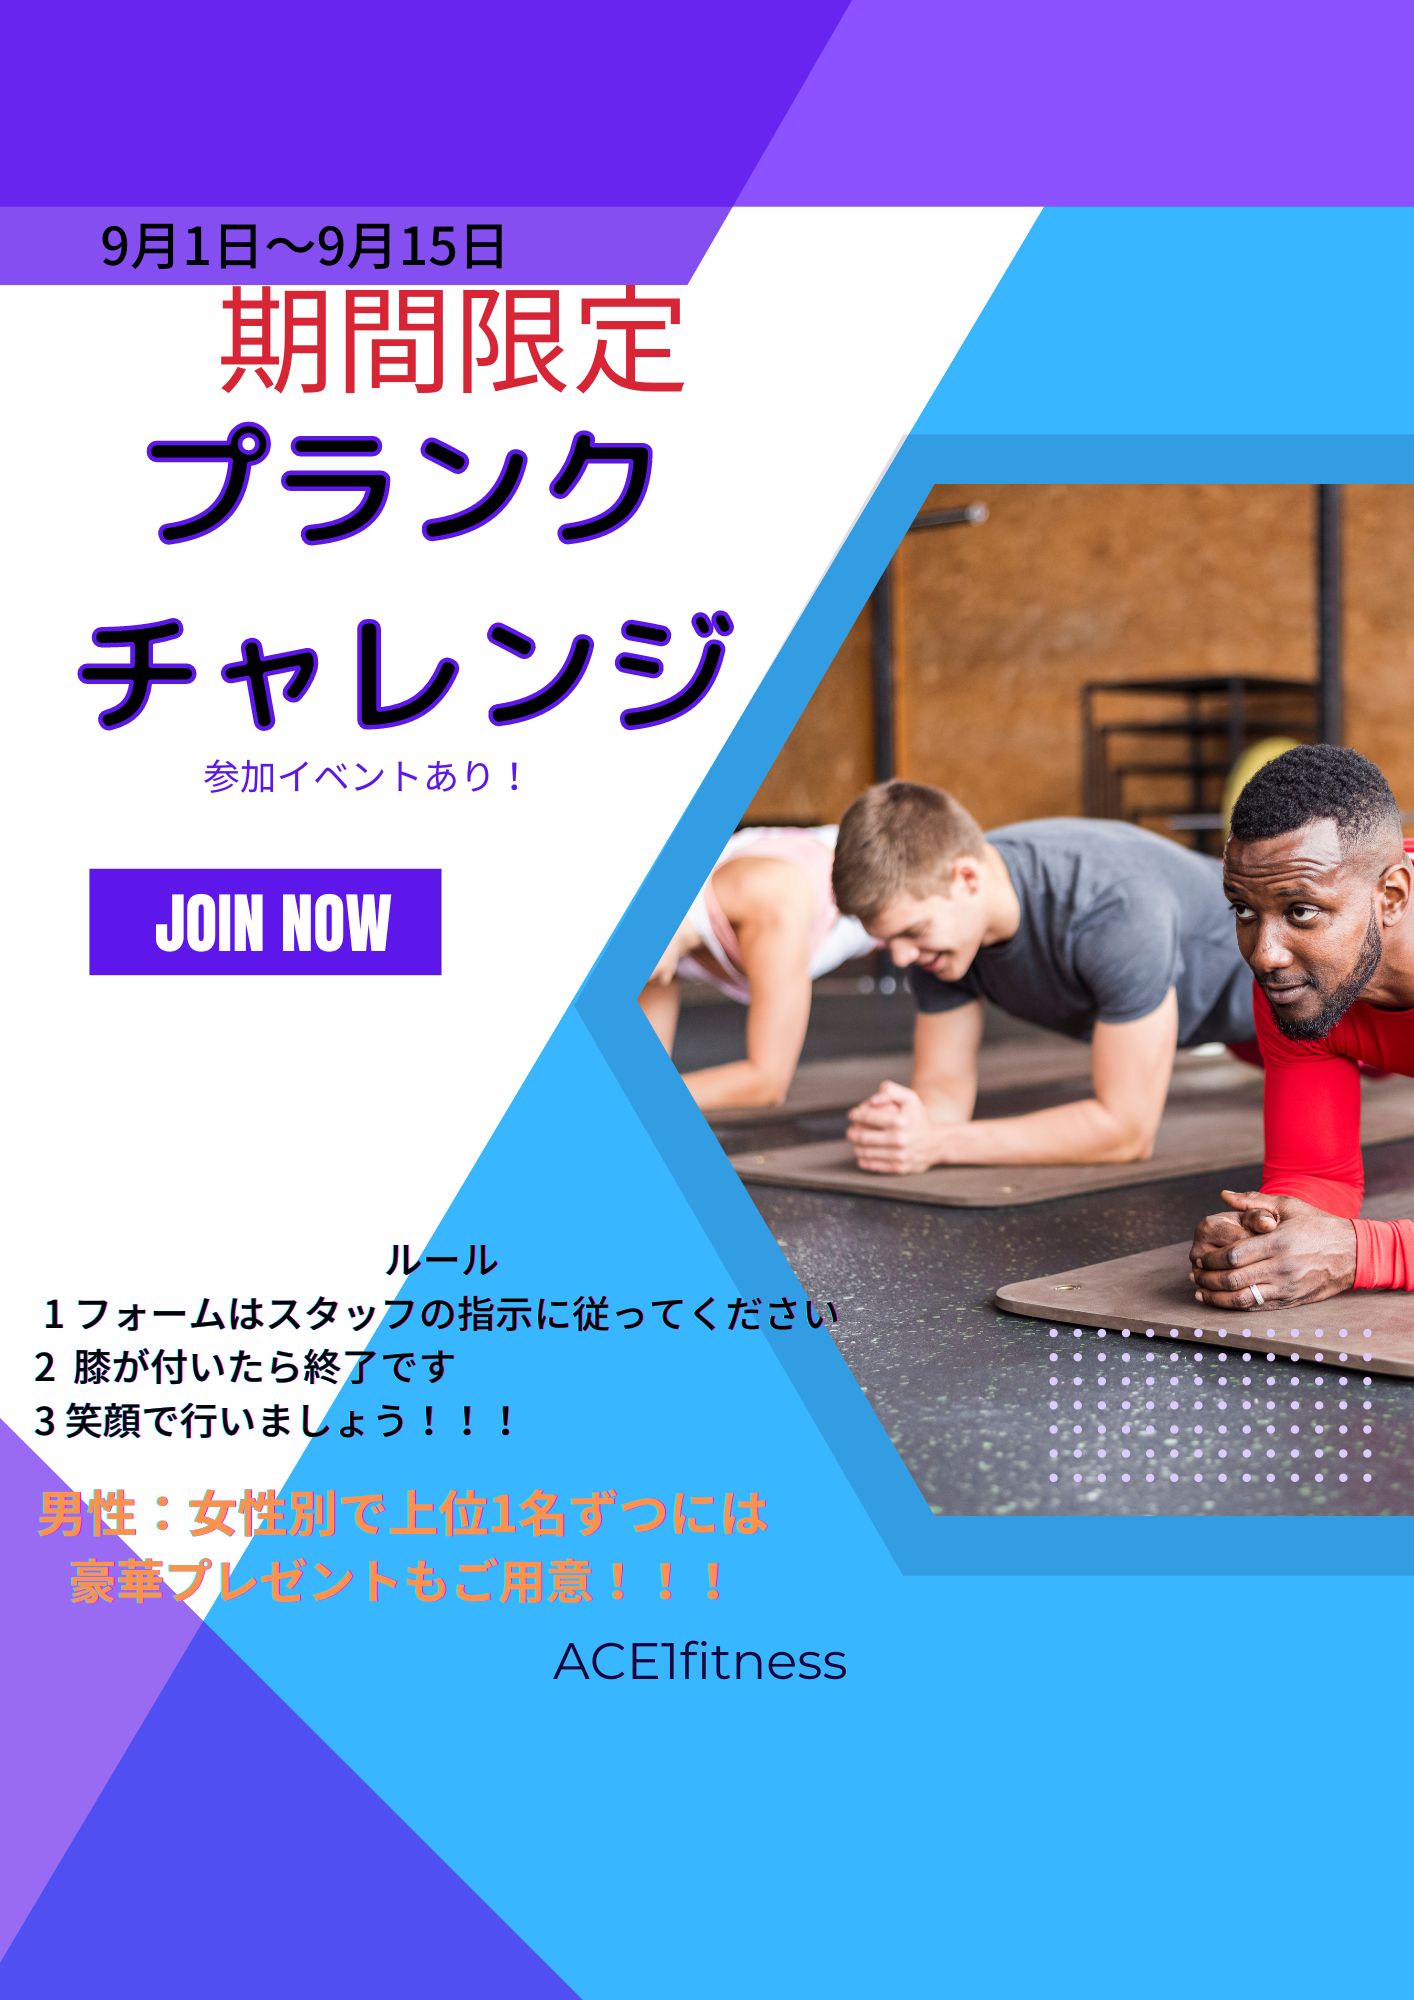 ACE1fitness期間限定イベント🔆プランクチャレンジpage-visual ACE1fitness期間限定イベント🔆プランクチャレンジビジュアル